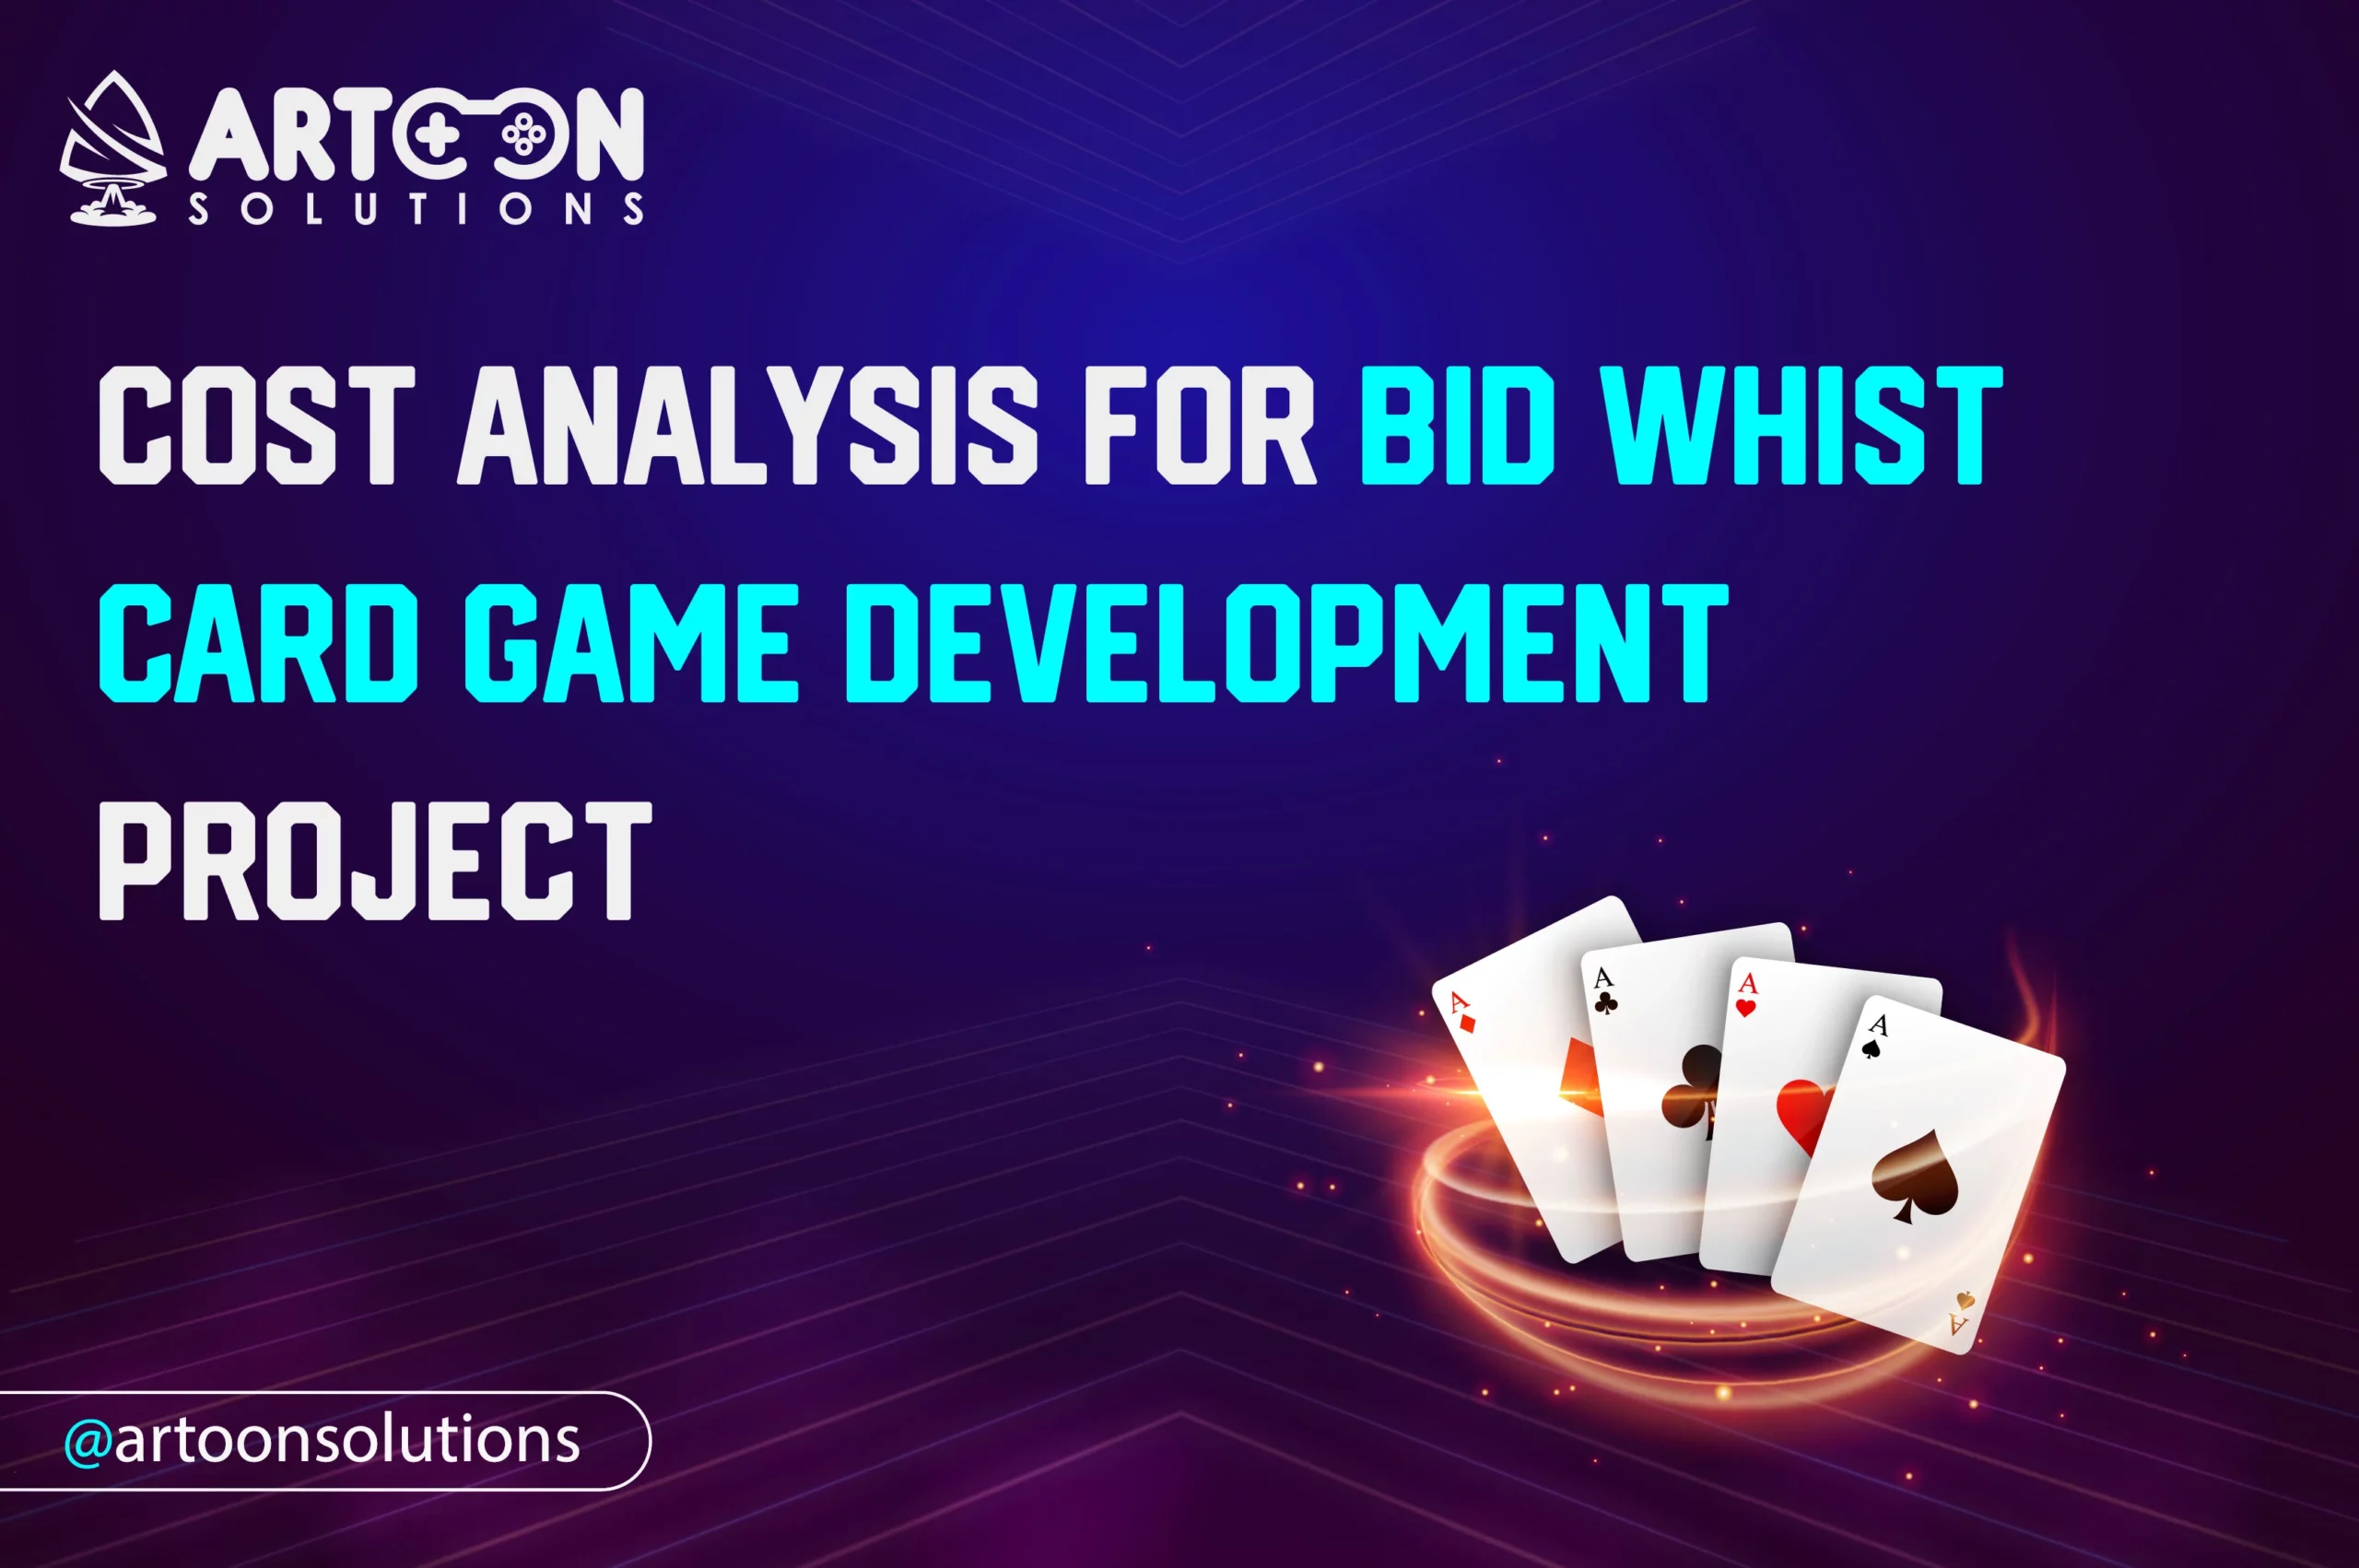 Cost Analysis for Bid Whist Card Game Development Project